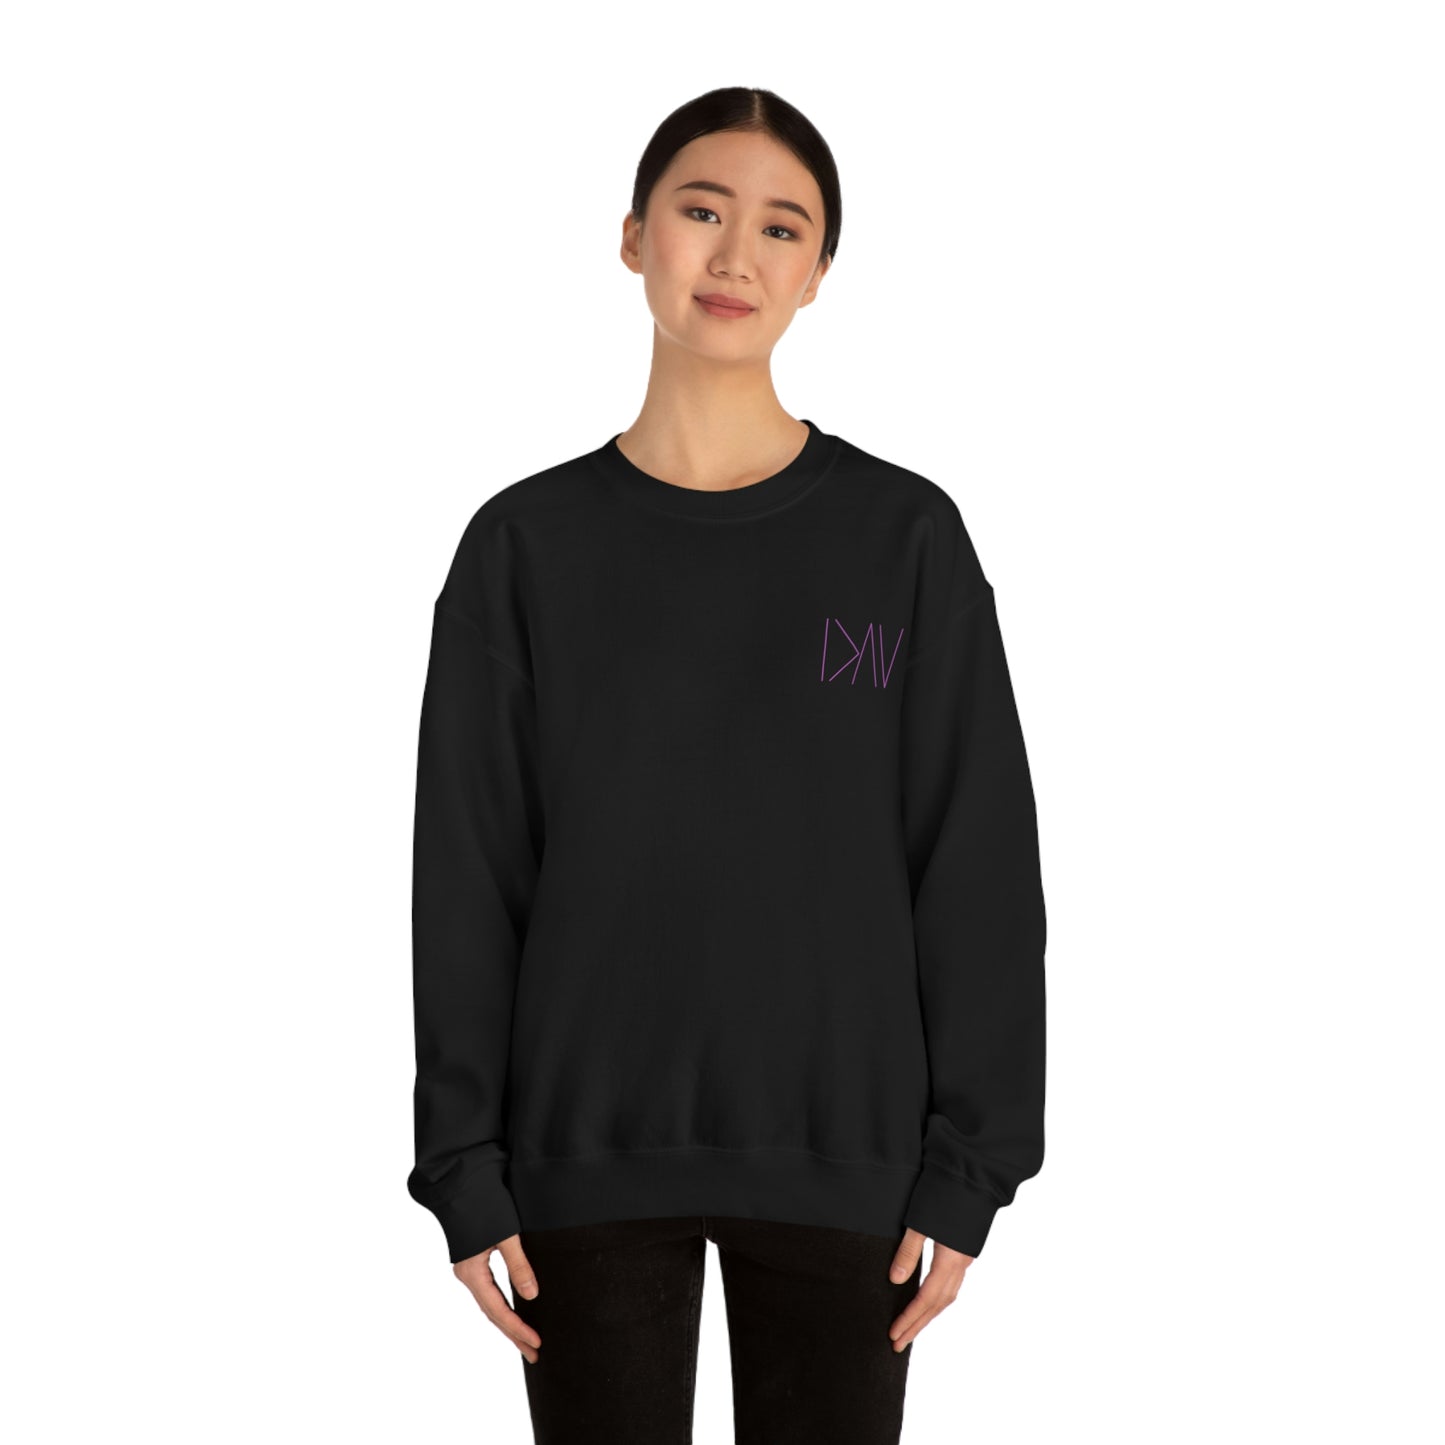 greater than highs & lows sweatshirt